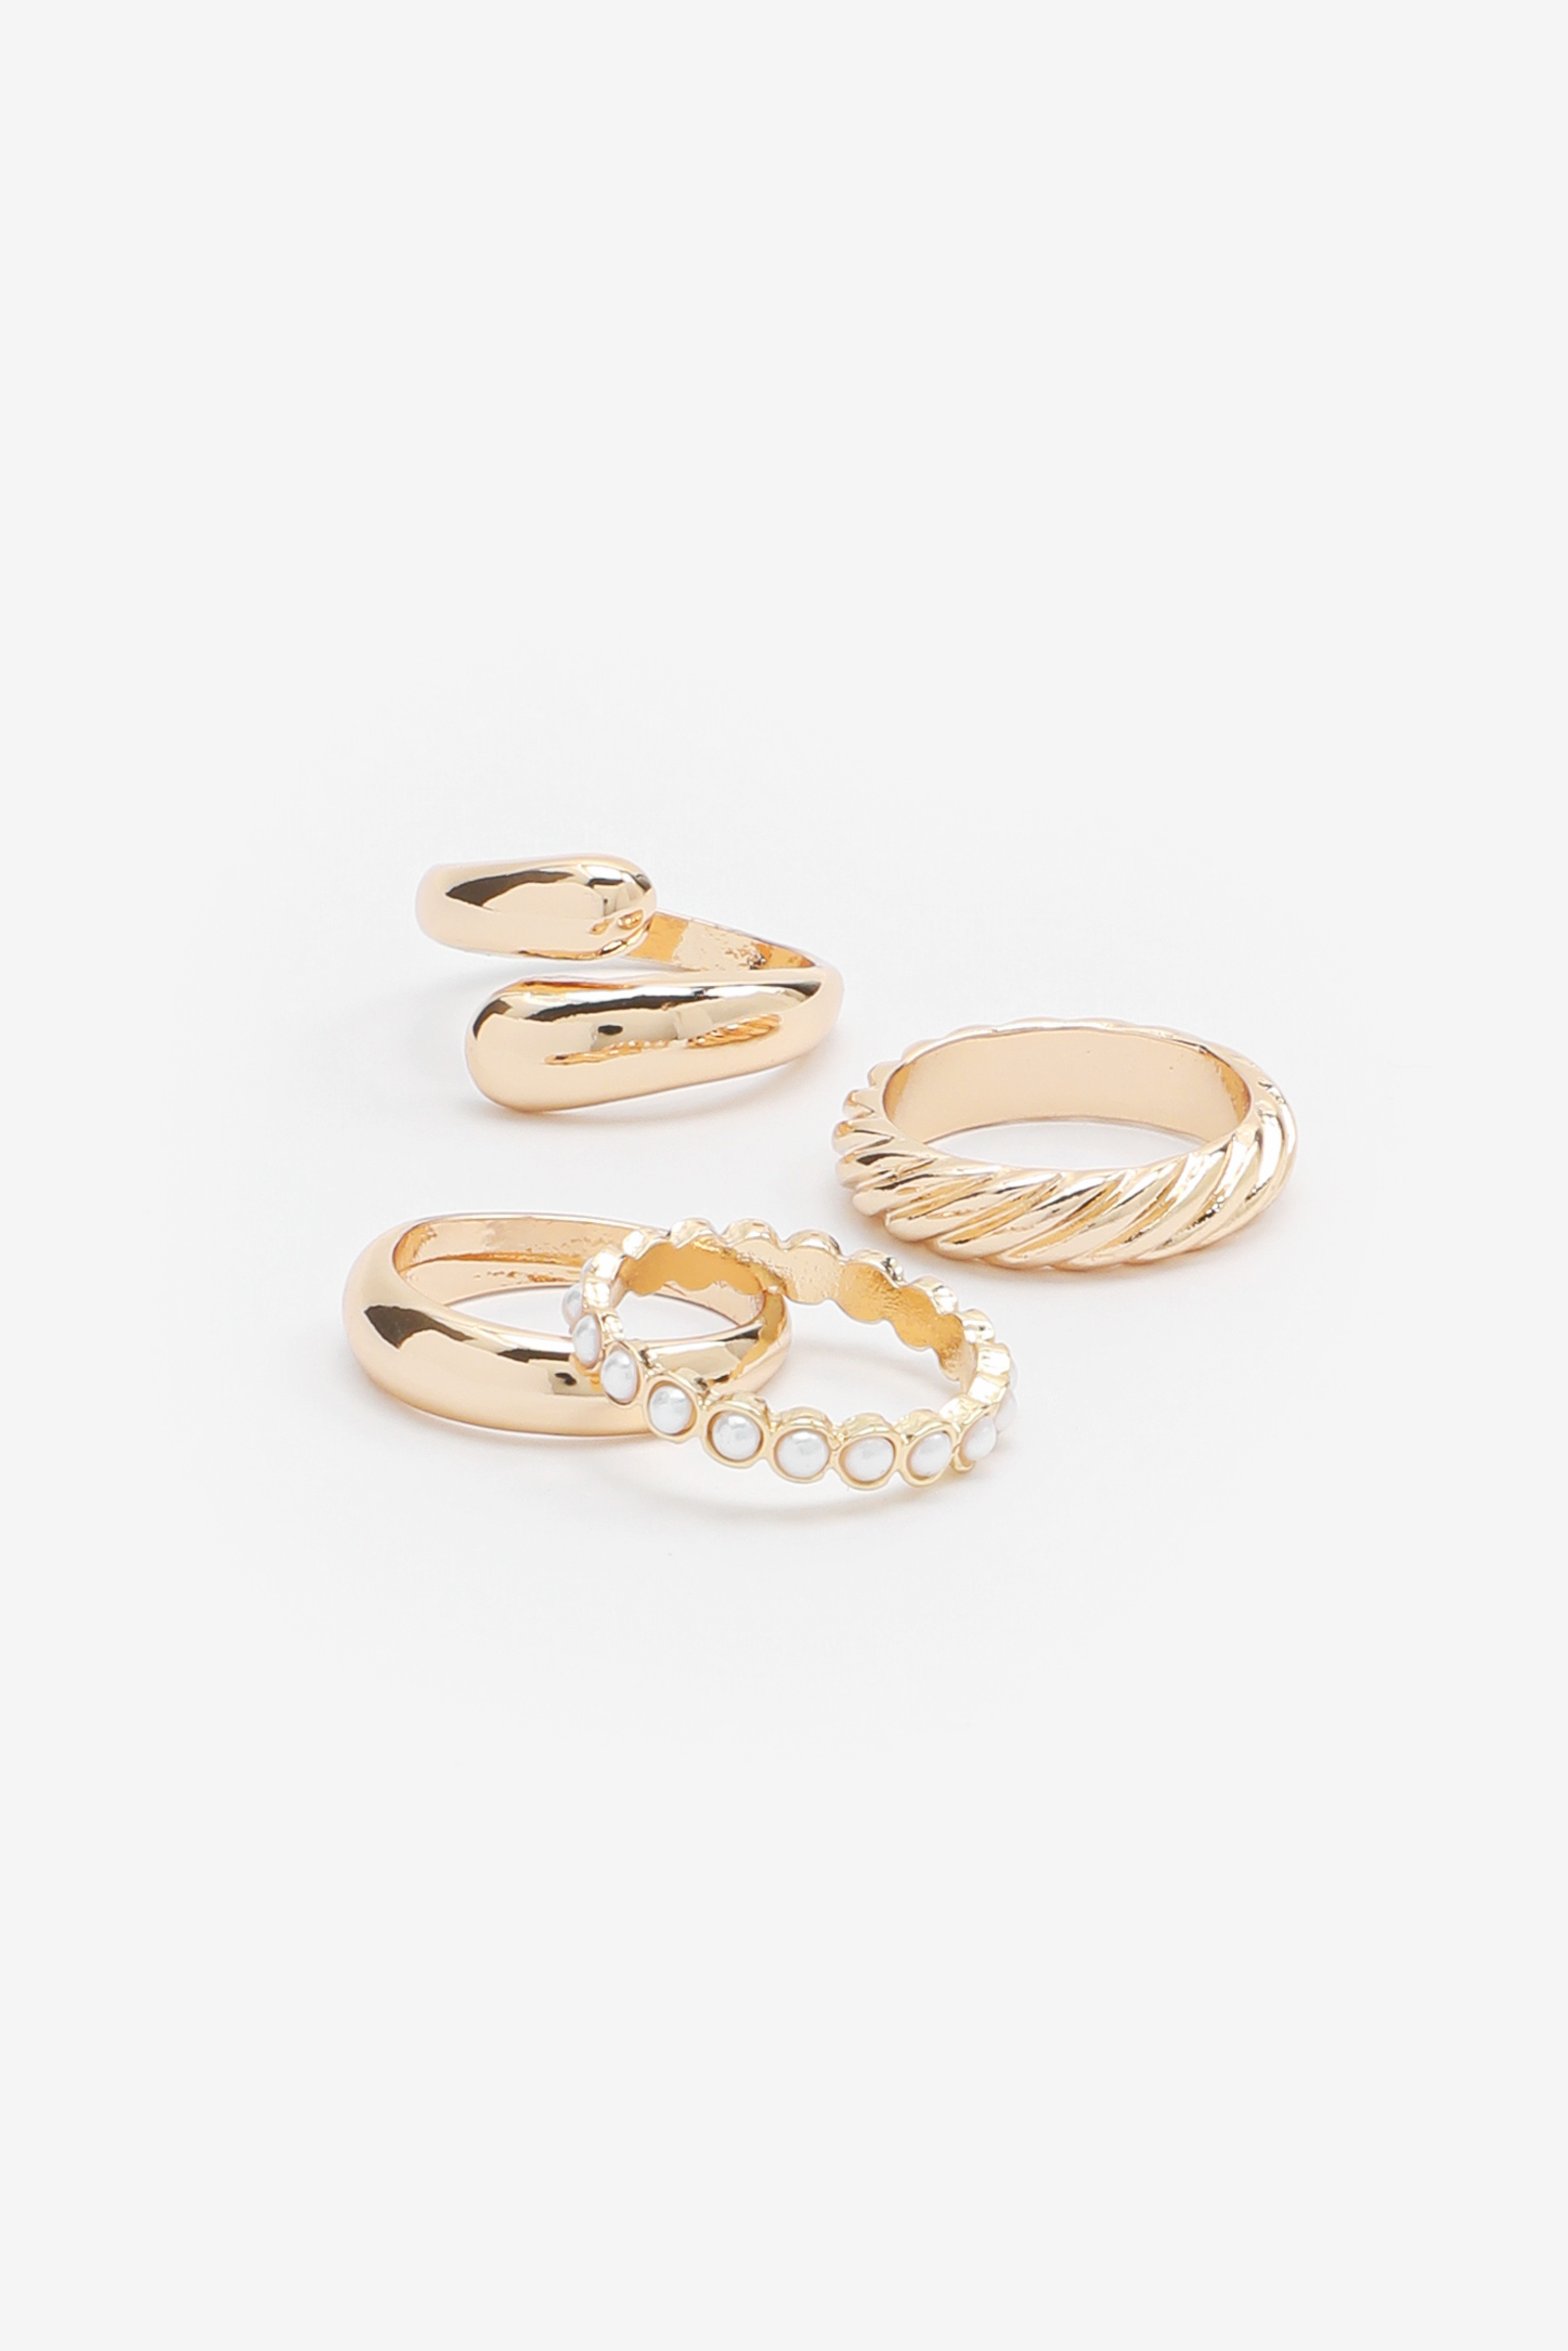 Pack of Gold-Tone Statement Rings